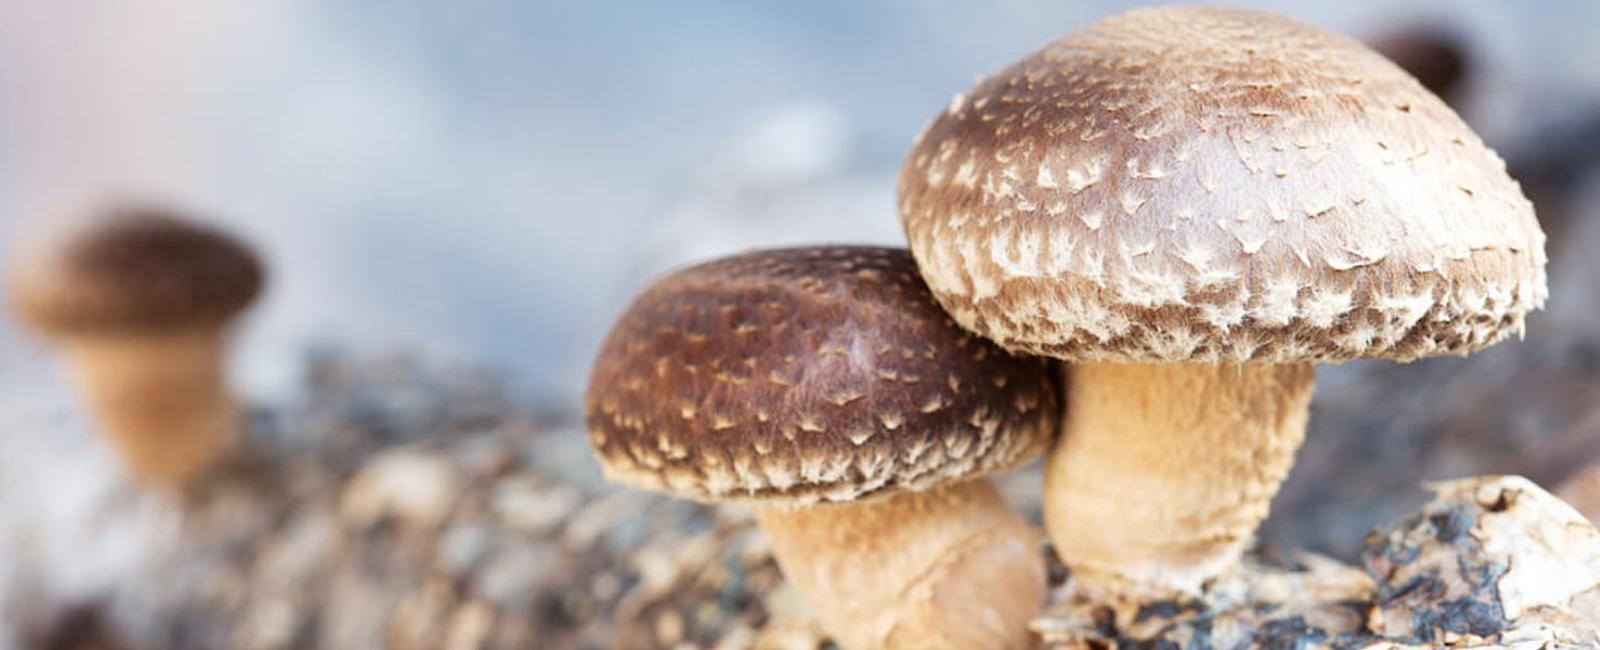 The Complete Guide to Shiitake Mushrooms